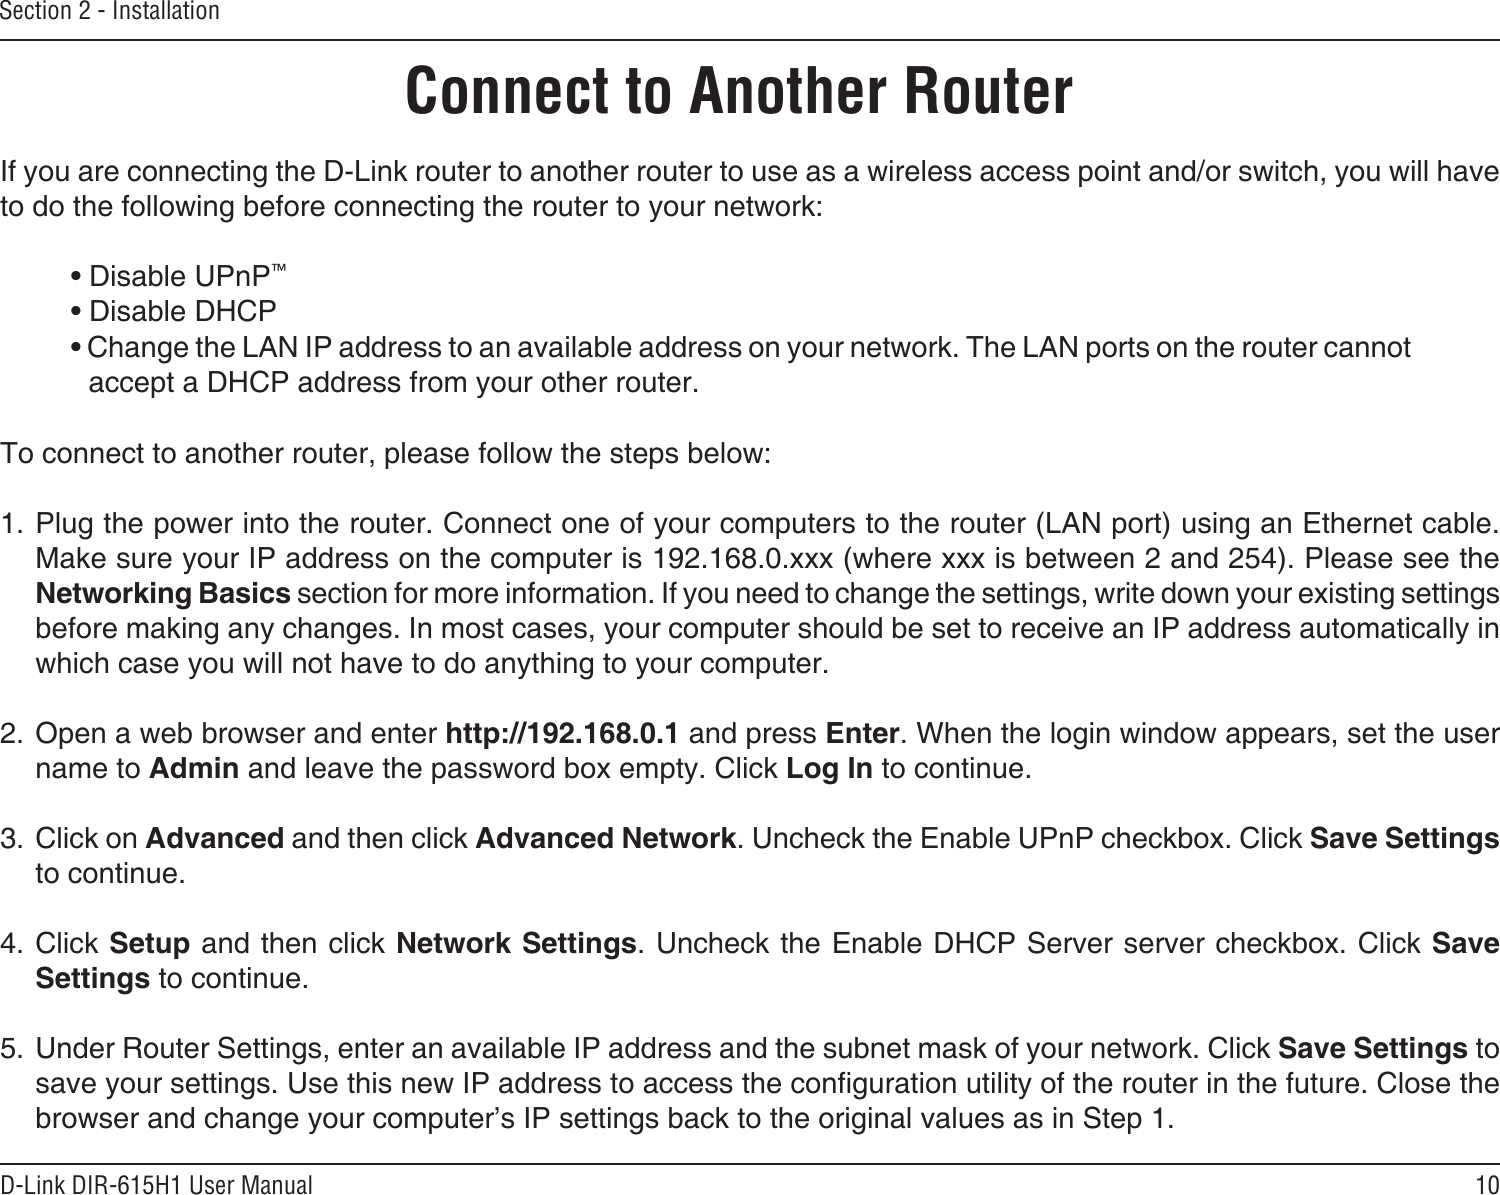 10D-Link DIR-615H1 User ManualSection 2 - InstallationIf you are connecting the D-Link router to another router to use as a wireless access point and/or switch, you will have to do the following before connecting the router to your network:• Disable UPnP™• Disable DHCP• Change the LAN IP address to an available address on your network. The LAN ports on the router cannot accept a DHCP address from your other router.To connect to another router, please follow the steps below:1. Plug the power into the router. Connect one of your computers to the router (LAN port) using an Ethernet cable. Make sure your IP address on the computer is 192.168.0.xxx (where xxx is between 2 and 254). Please see the Networking Basics section for more information. If you need to change the settings, write down your existing settings before making any changes. In most cases, your computer should be set to receive an IP address automatically in which case you will not have to do anything to your computer.2. Open a web browser and enter http://192.168.0.1 and press Enter. When the login window appears, set the user name to Admin and leave the password box empty. Click Log In to continue.3. Click on Advanced and then click Advanced Network. Uncheck the Enable UPnP checkbox. Click Save Settings to continue. 4. Click Setup and then click Network Settings. Uncheck the Enable DHCP Server server checkbox. Click Save Settings to continue.5. Under Router Settings, enter an available IP address and the subnet mask of your network. Click Save Settings to save your settings. Use this new IP address to access the conguration utility of the router in the future. Close the browser and change your computer’s IP settings back to the original values as in Step 1.Connect to Another Router